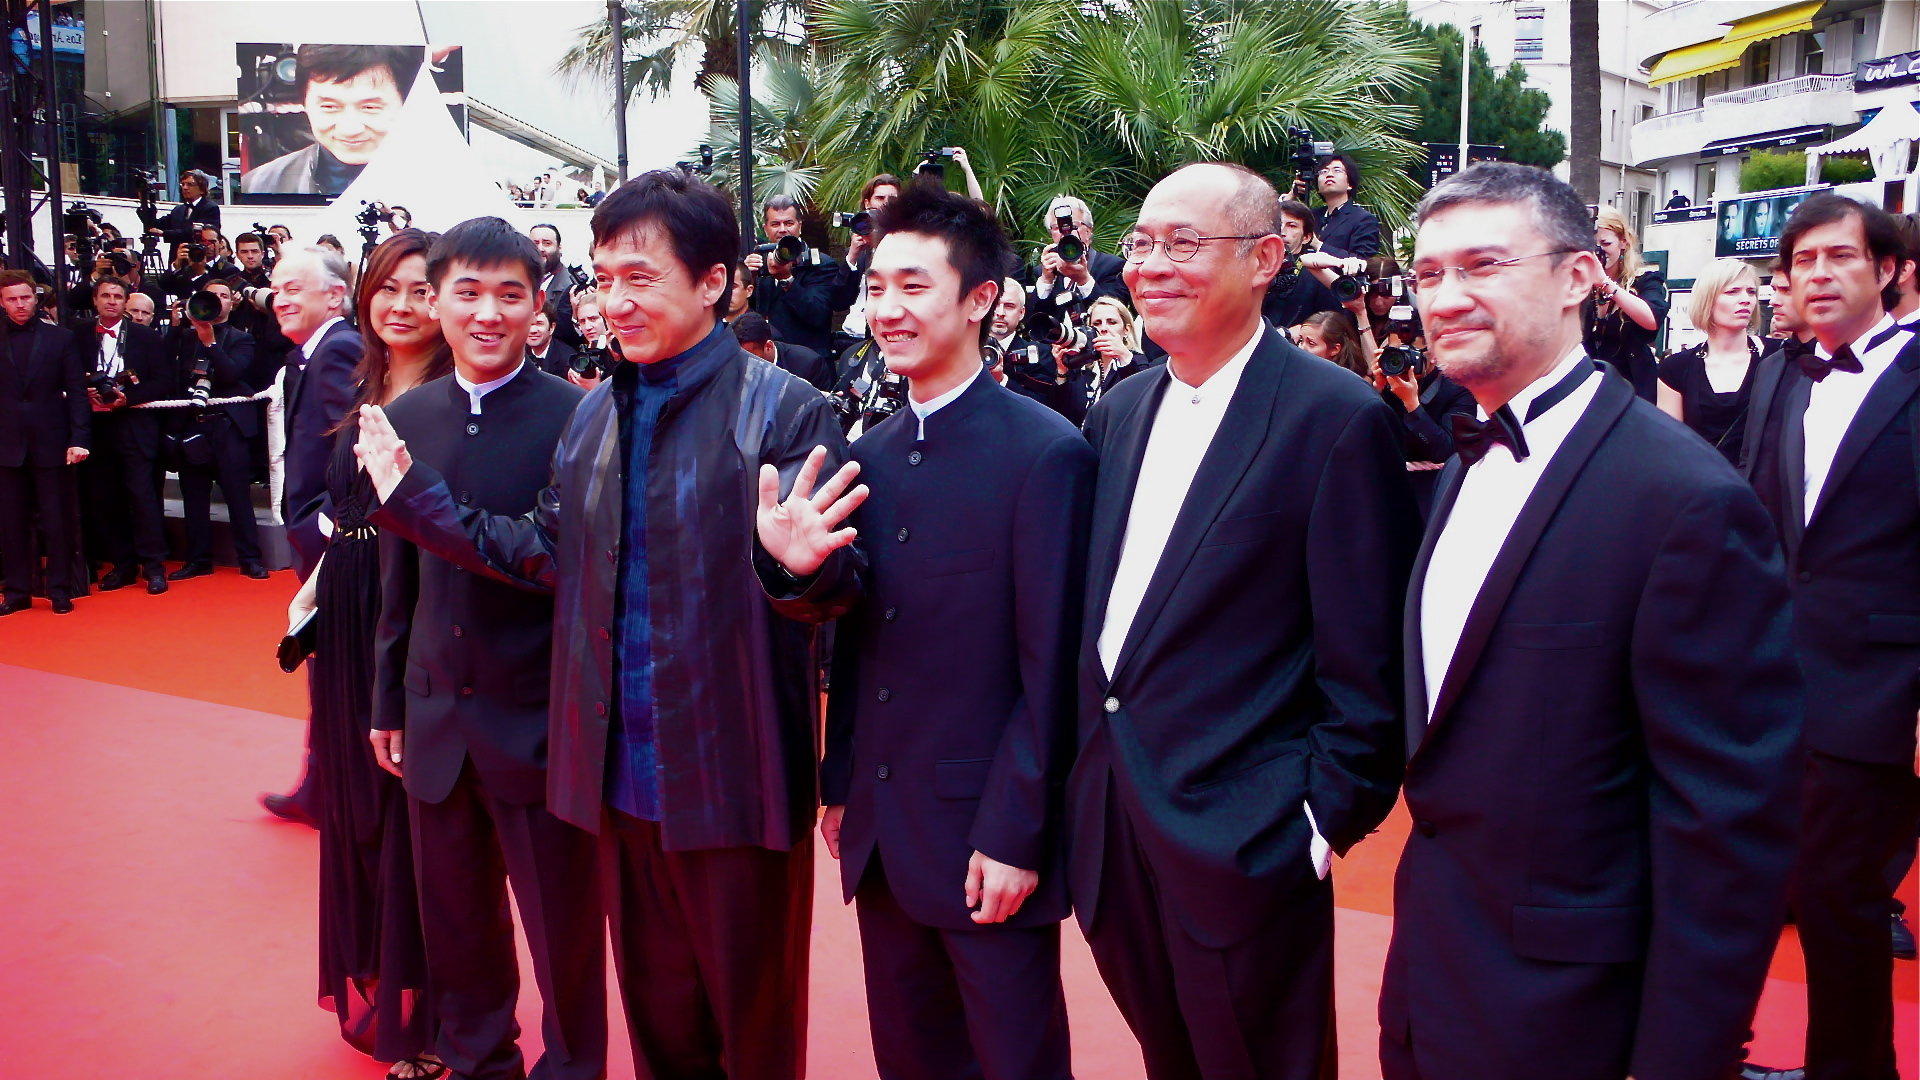 Cannes 08: Lead actors and makers of Wushu on the red carpet. (Left to Right) Colette Koo, Wang Wenjie, Jackie Chan, Liu Fengchao, John Sham and Antony Szeto